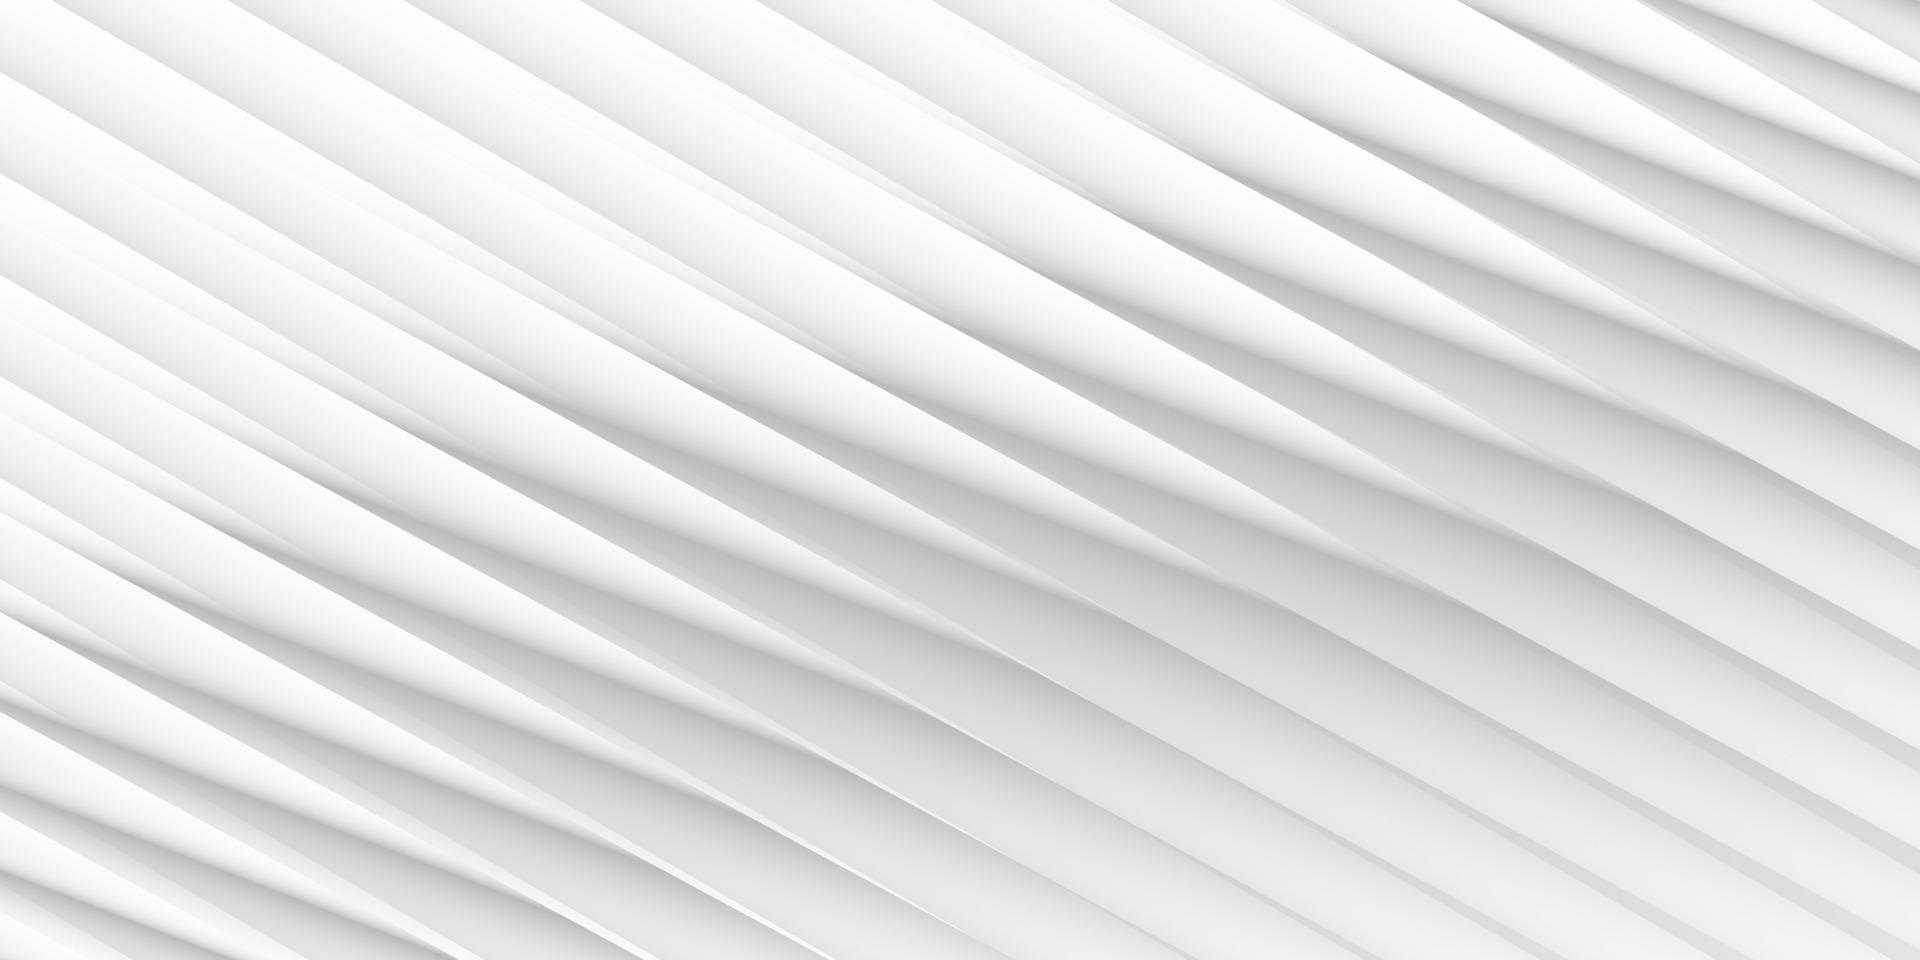 Abstract  white and gray color, modern design stripes background. Vector illustration.